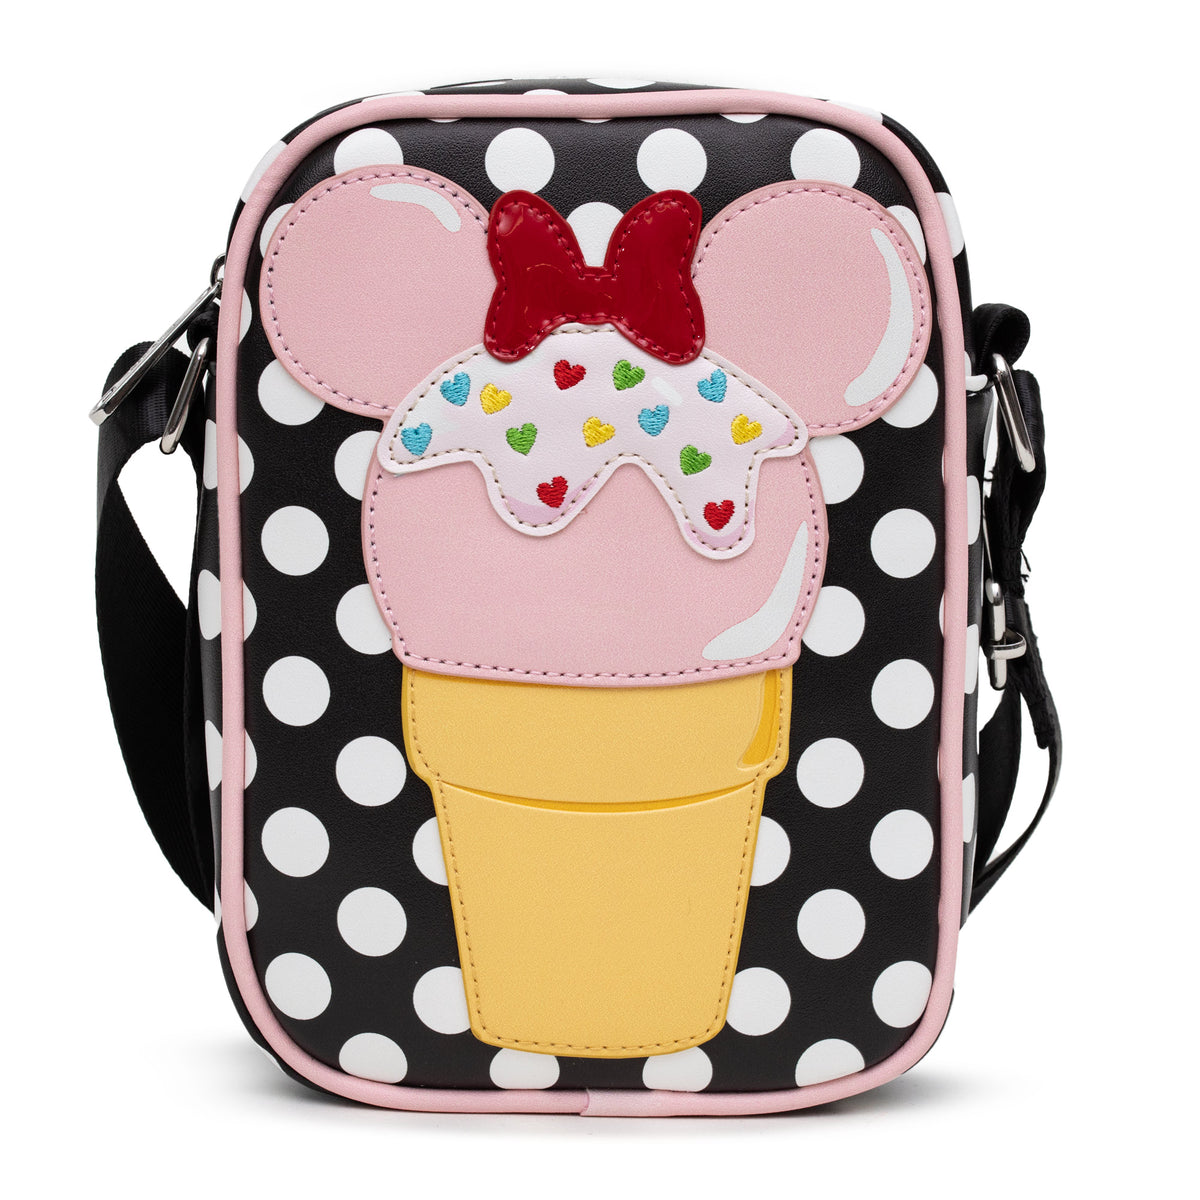 Disney Minnie Mouse Lunch Bag With Strap